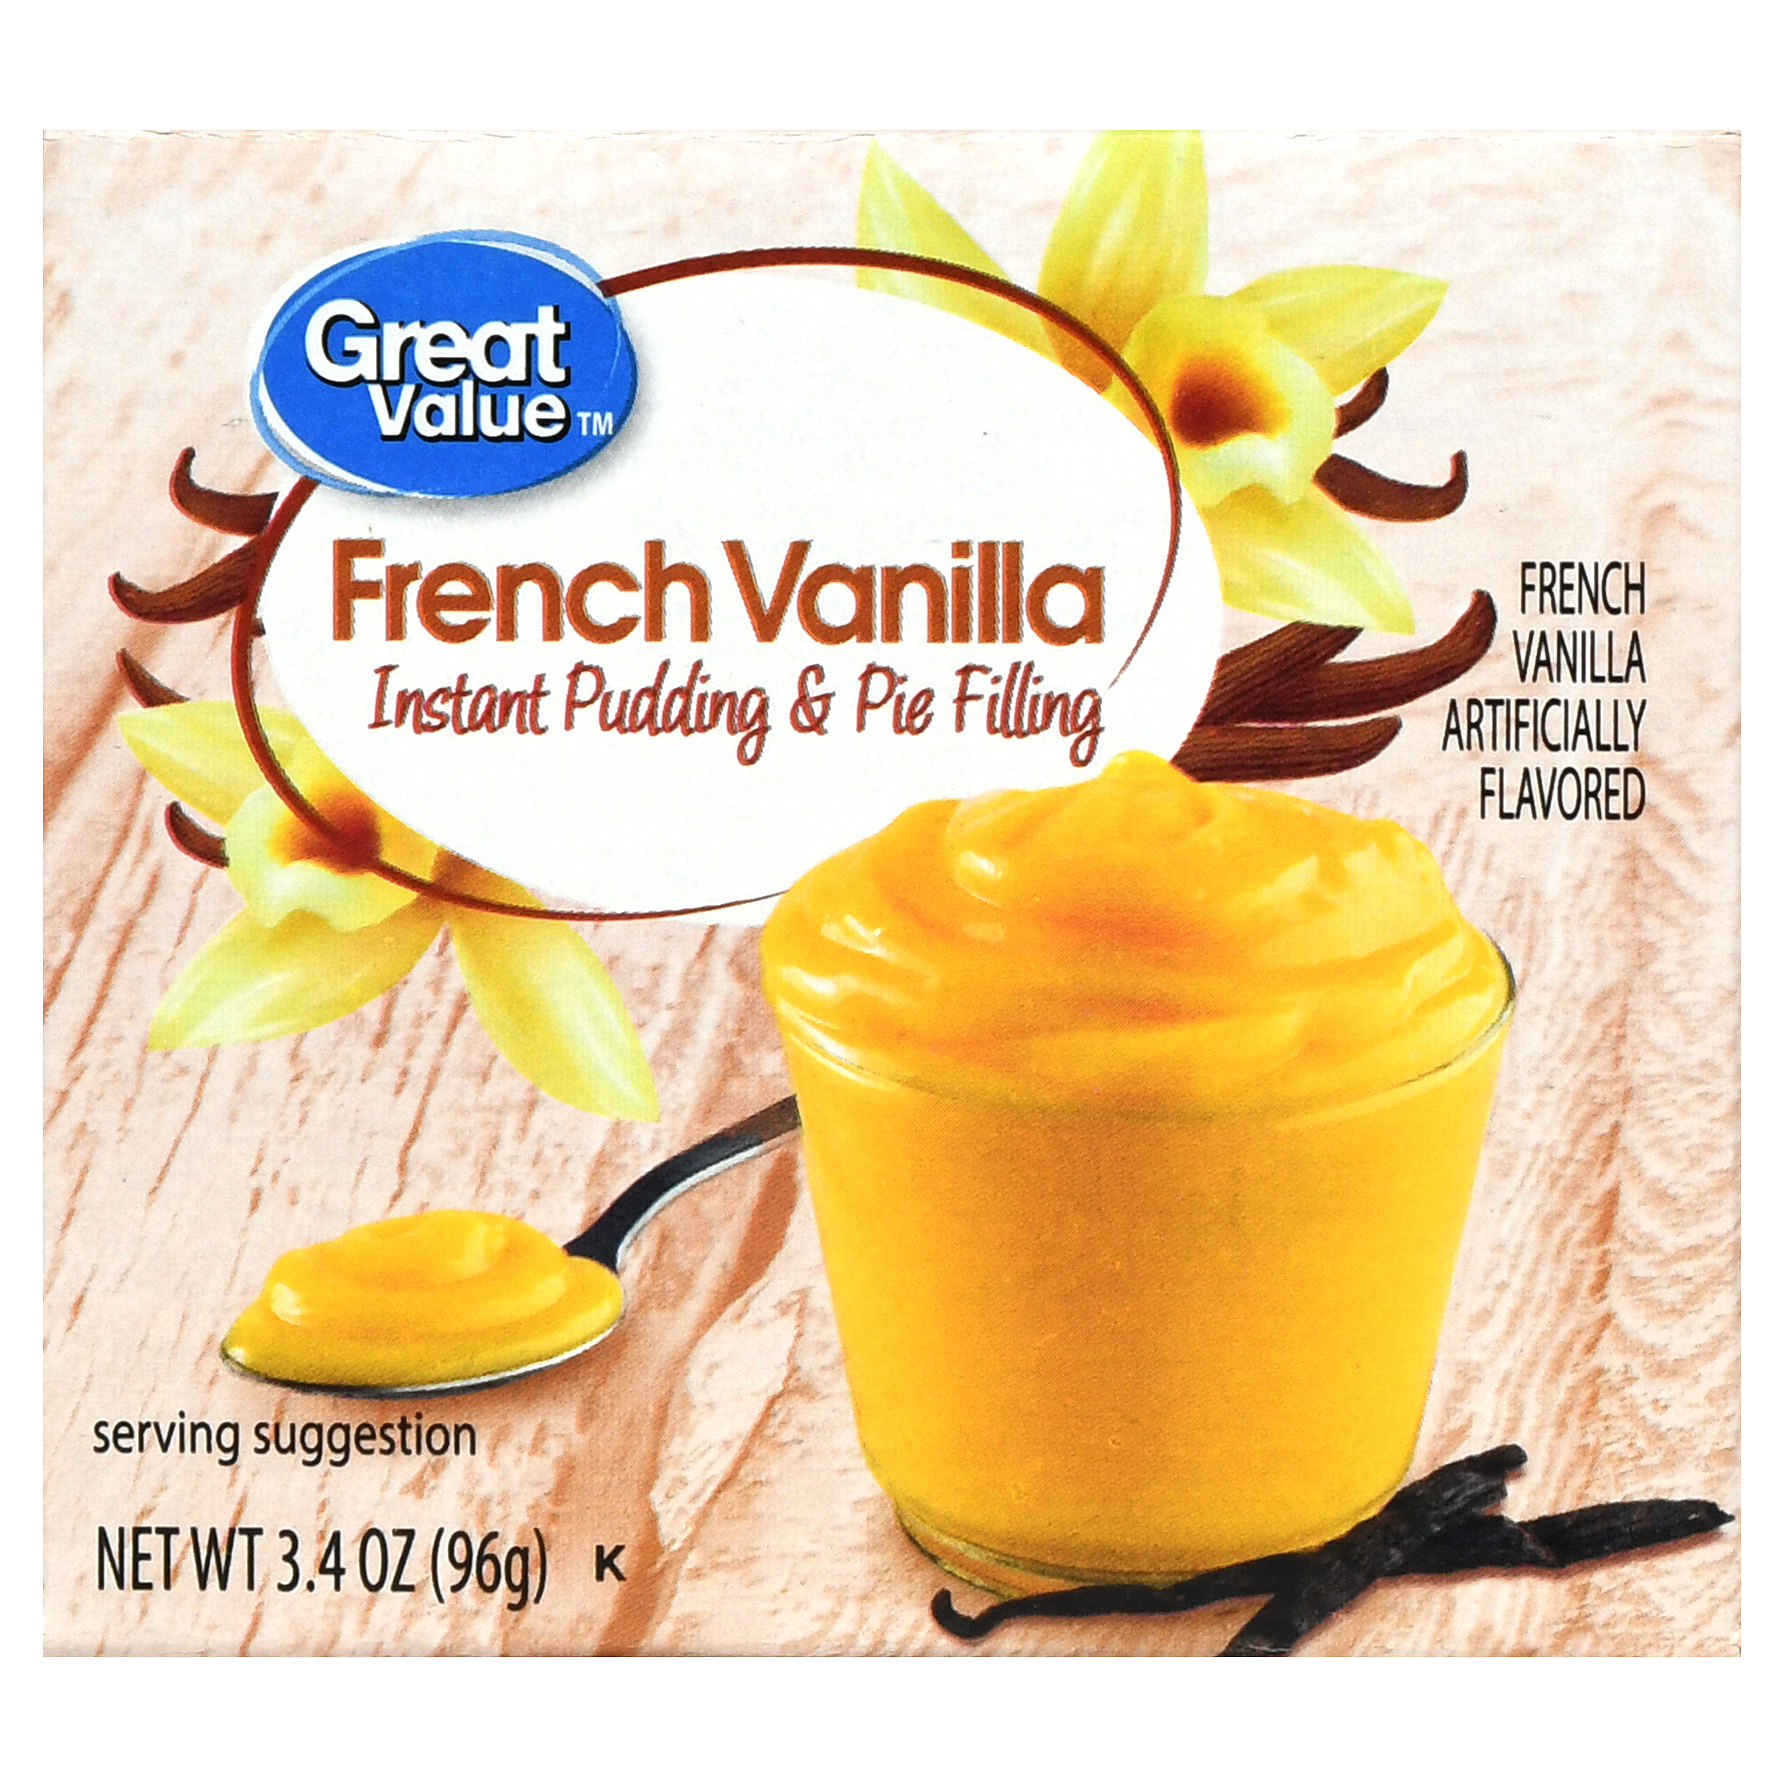 (3 Pack) Great Value Instant Pudding & Pie Filling, French Vanilla, 3.4 Oz Image